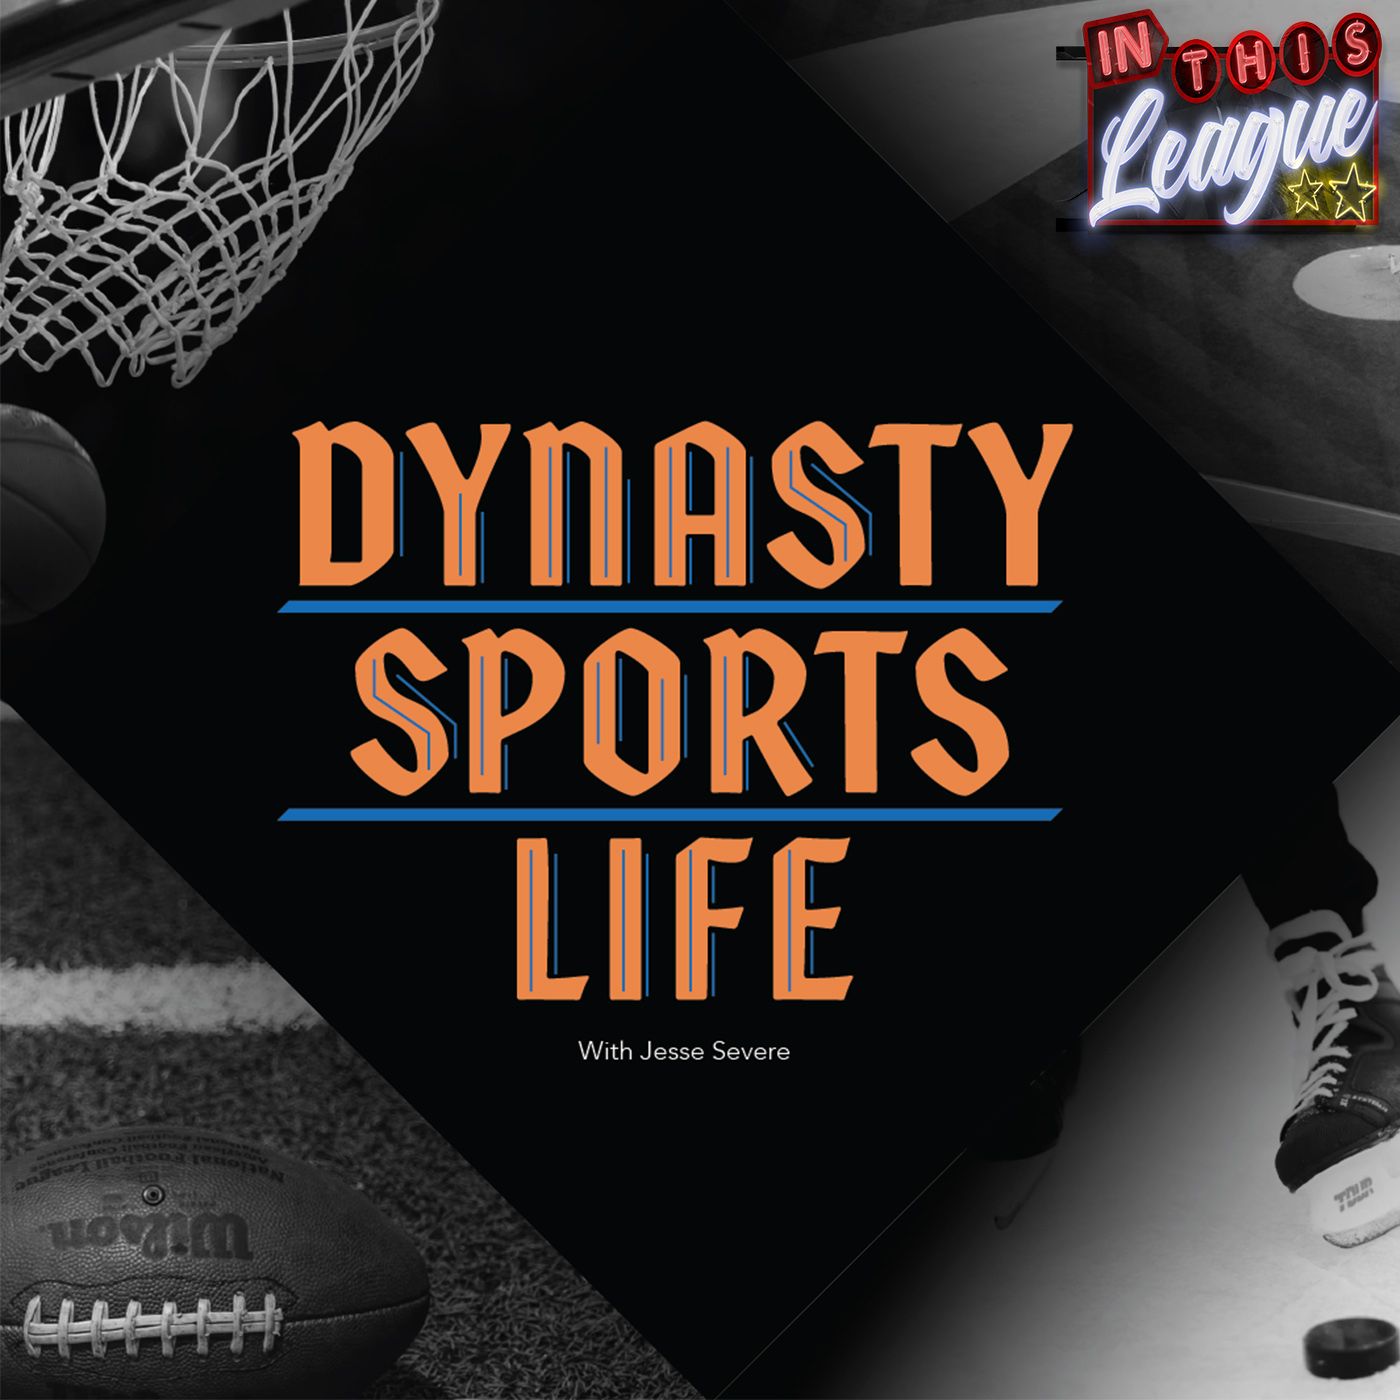 Dynasty Sports Life Ep. 117 Matt Cooper on NFL Draft QBs and landing spots